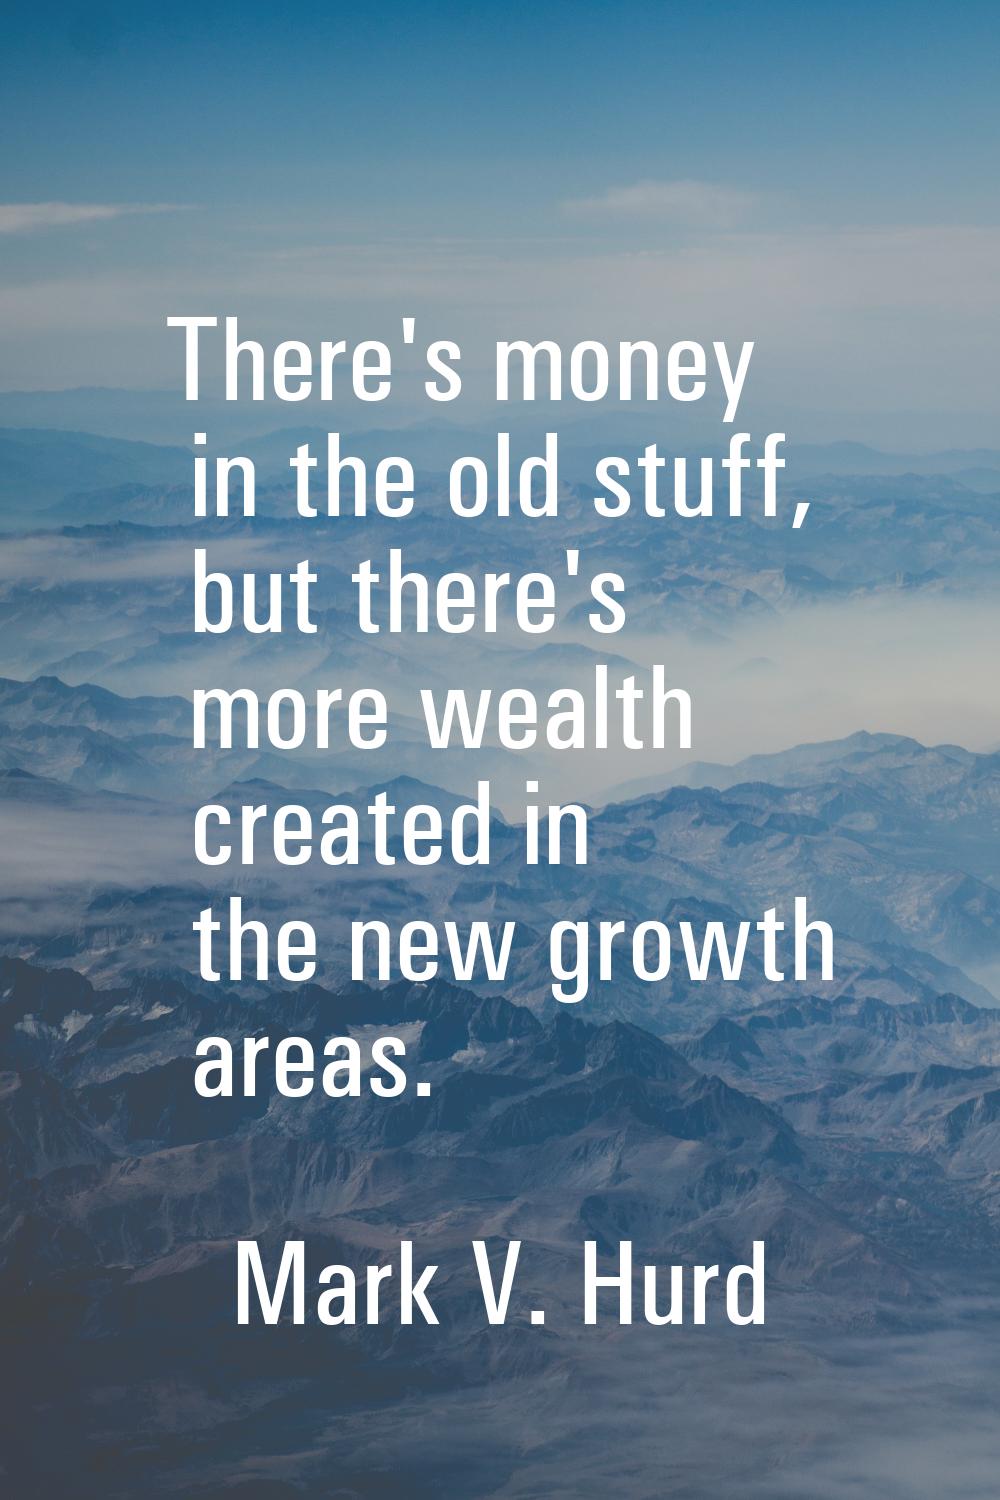 There's money in the old stuff, but there's more wealth created in the new growth areas.